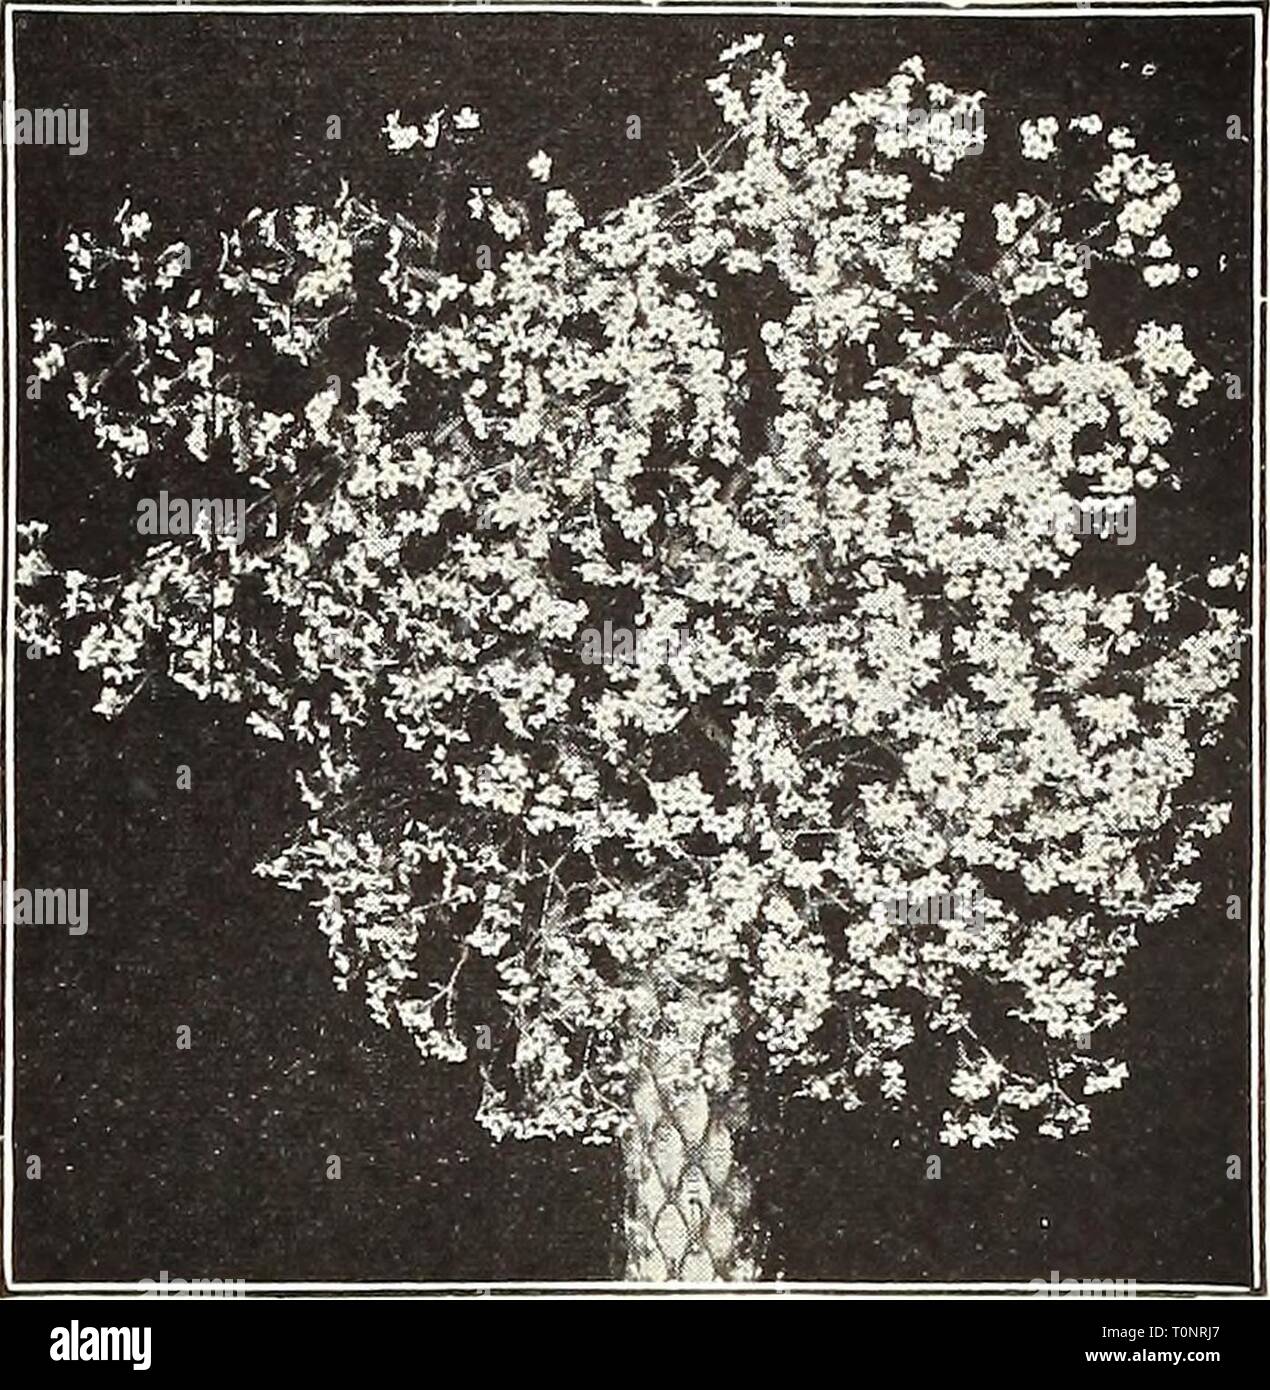 Dreer's autumn catalogue 1922 (1922) Dreer's autumn catalogue 1922  dreersautumncata1922henr Year: 1922  /flEHiyMM^iS^i5lMdM.l&||iifeU^iikf^ 39 GYPSOPHILA (Baby. Breath) TheGypsophilas will thrive in any soil in a sunny position, and on ac- count of their gracefully arranged large panicles of minute flowers should be in every garden. Cerastioides. A fine variety for the rockery, growing but 3 inches high, and producing from June to August small white flowers marked witli pink. Paniculata. A beautiful old-fashioned plant, possessing a urace not found in any other perennial. When in bloom during Stock Photo